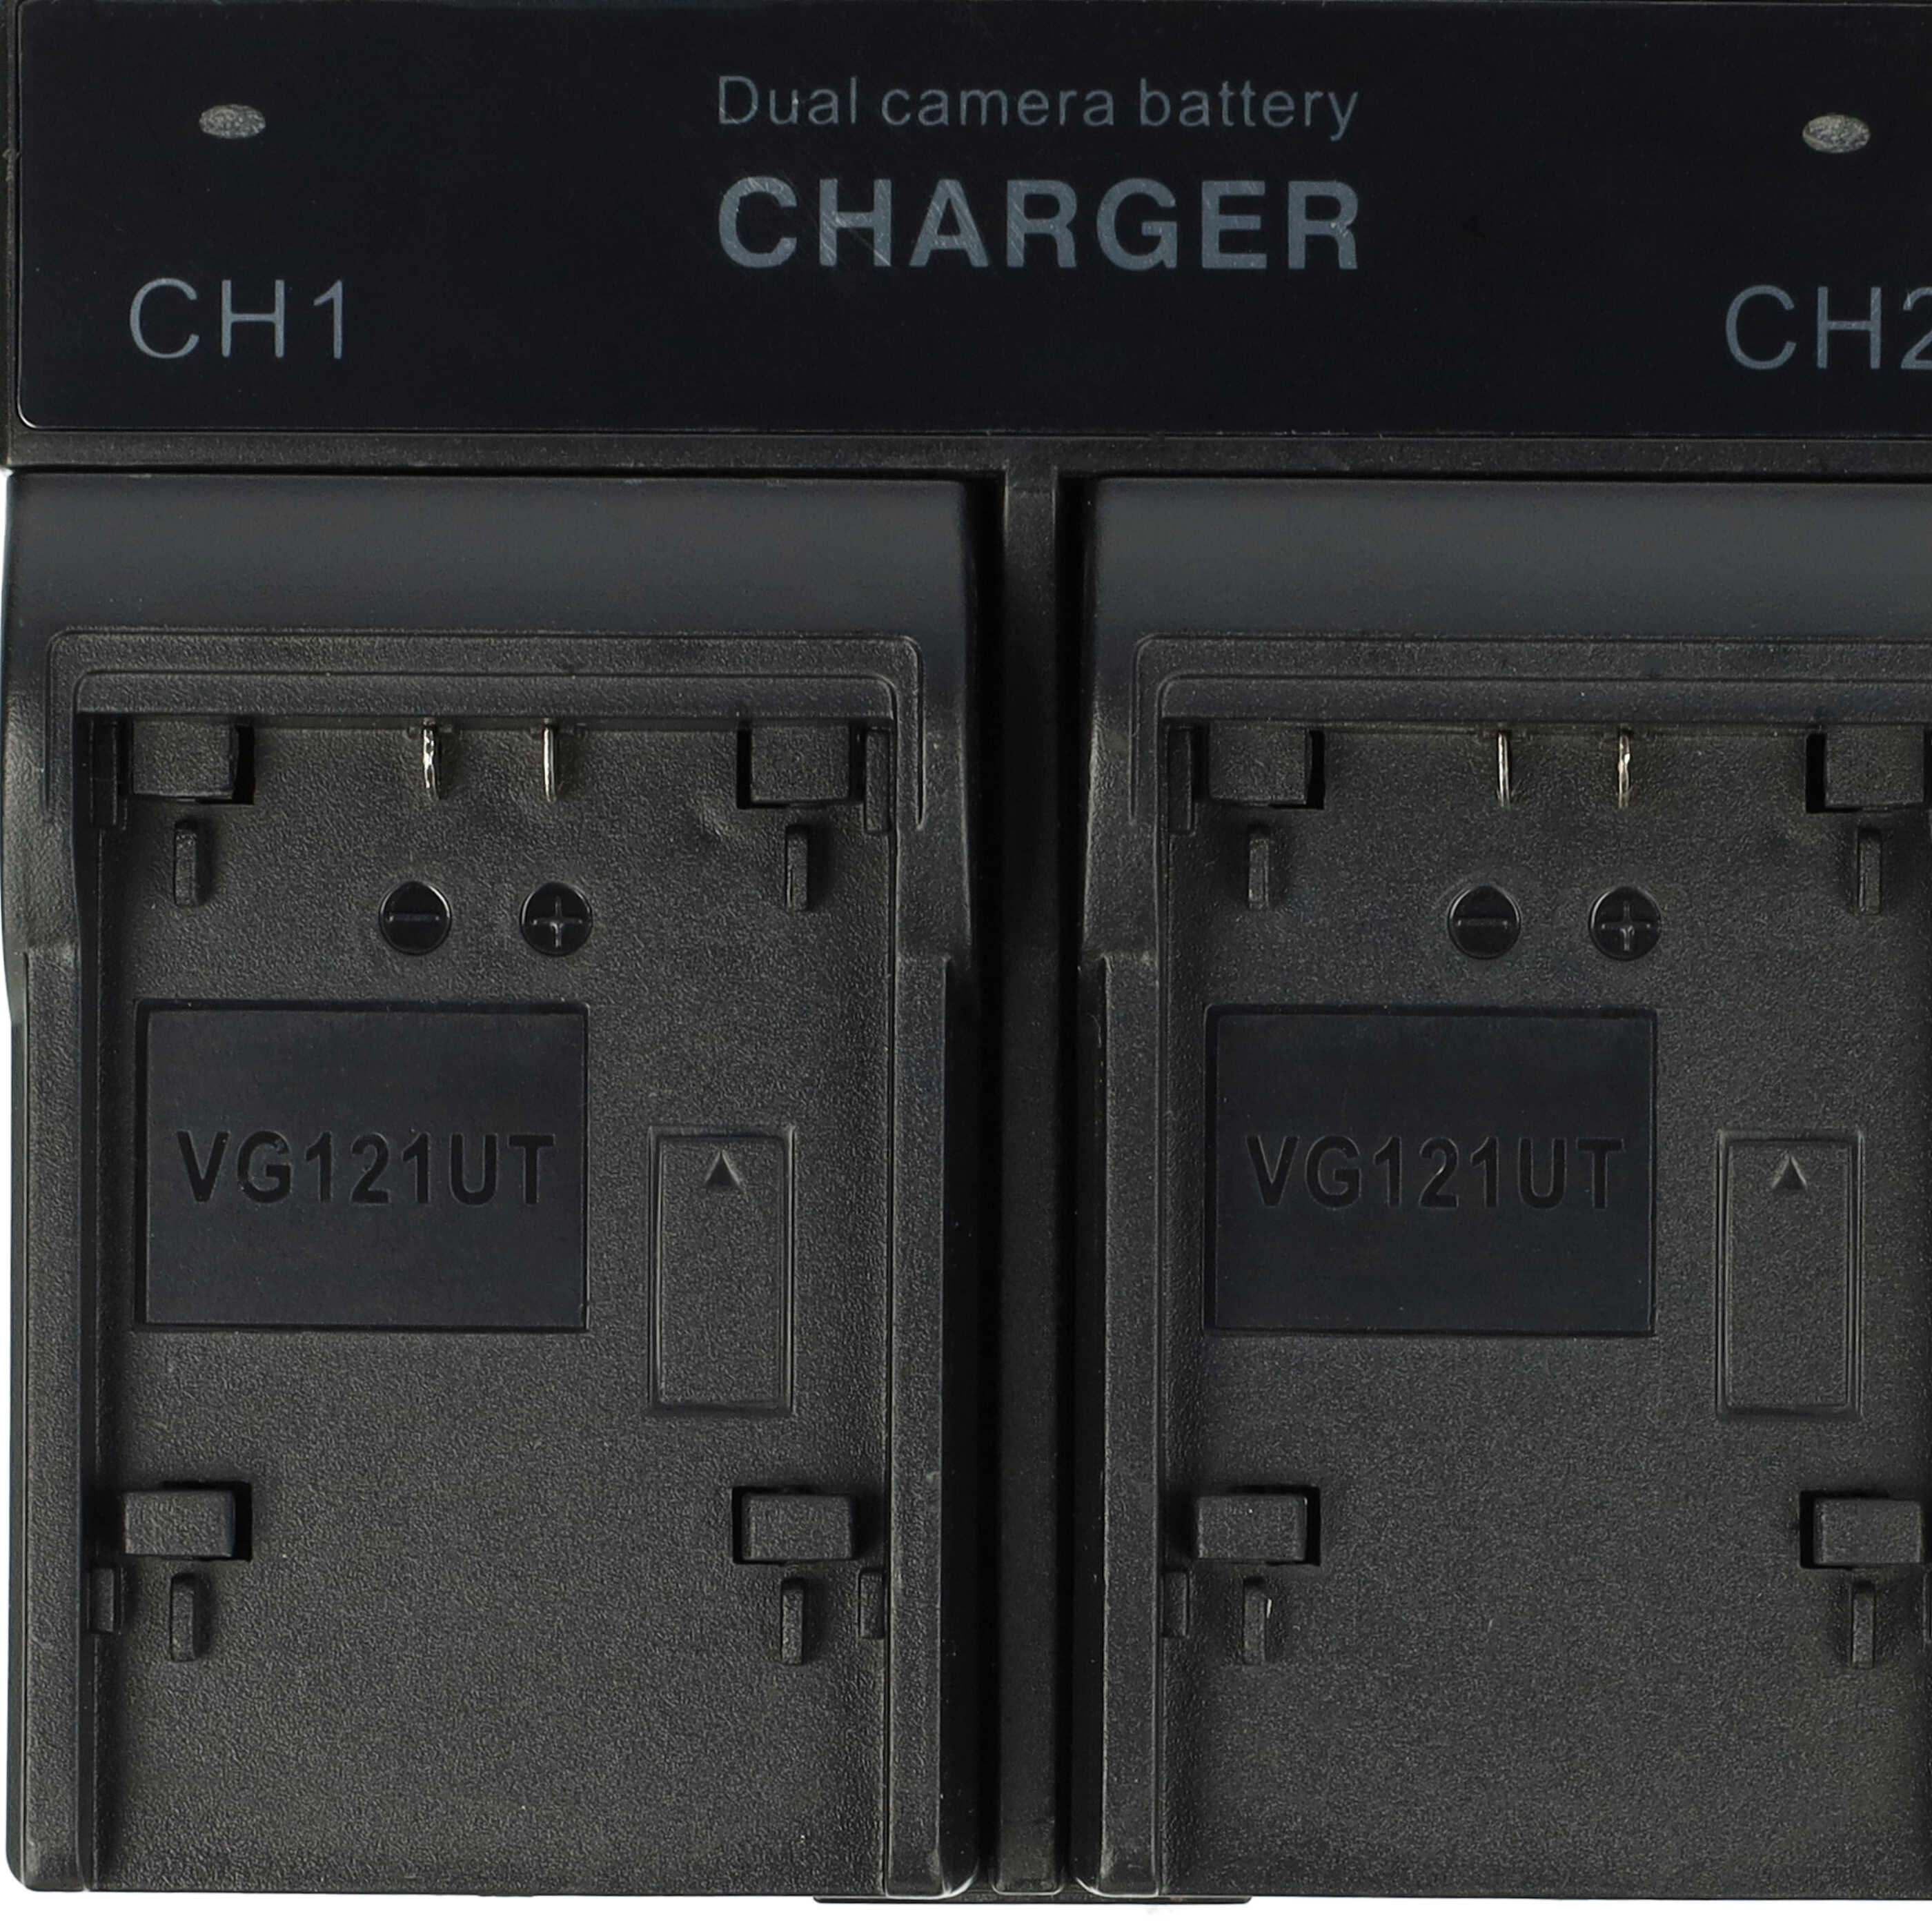 Battery Charger suitable for Everio BN-VG107E Camera etc. - 0.5 / 0.9 A, 4.2/8.4 V